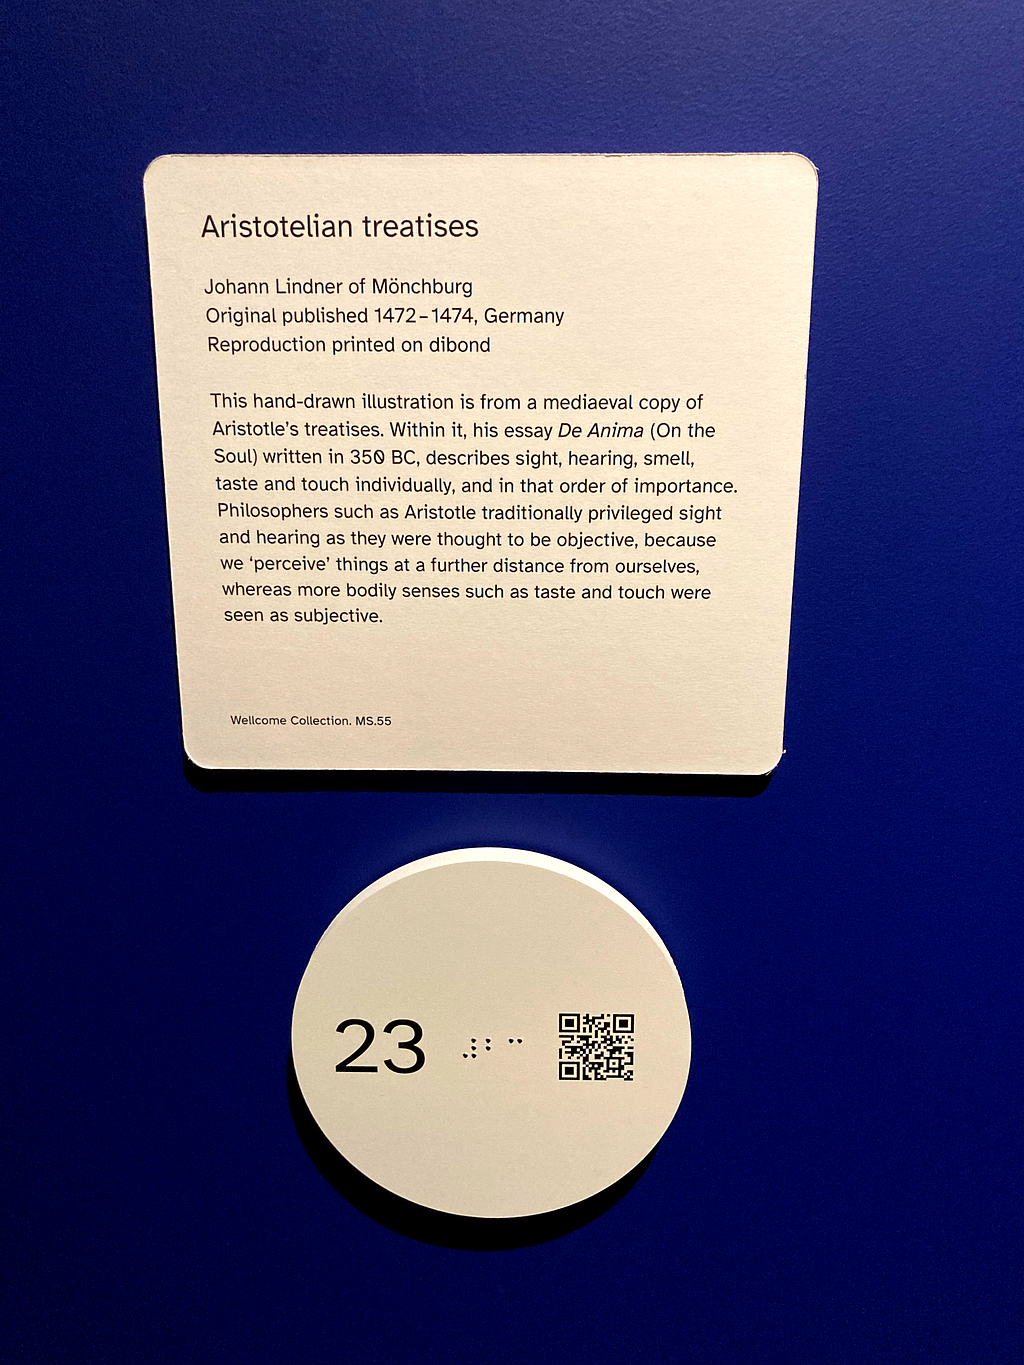 A photograph showing white signs in the gallery space on a blue wall. There is a rectangular sign with black text explaining the details of the exhibition item. Below this is a tactile sign that is round and raised, on it is a number refering to the stop in the guide, braile and a QR code that leads the to the digital exhibition guide when scanned